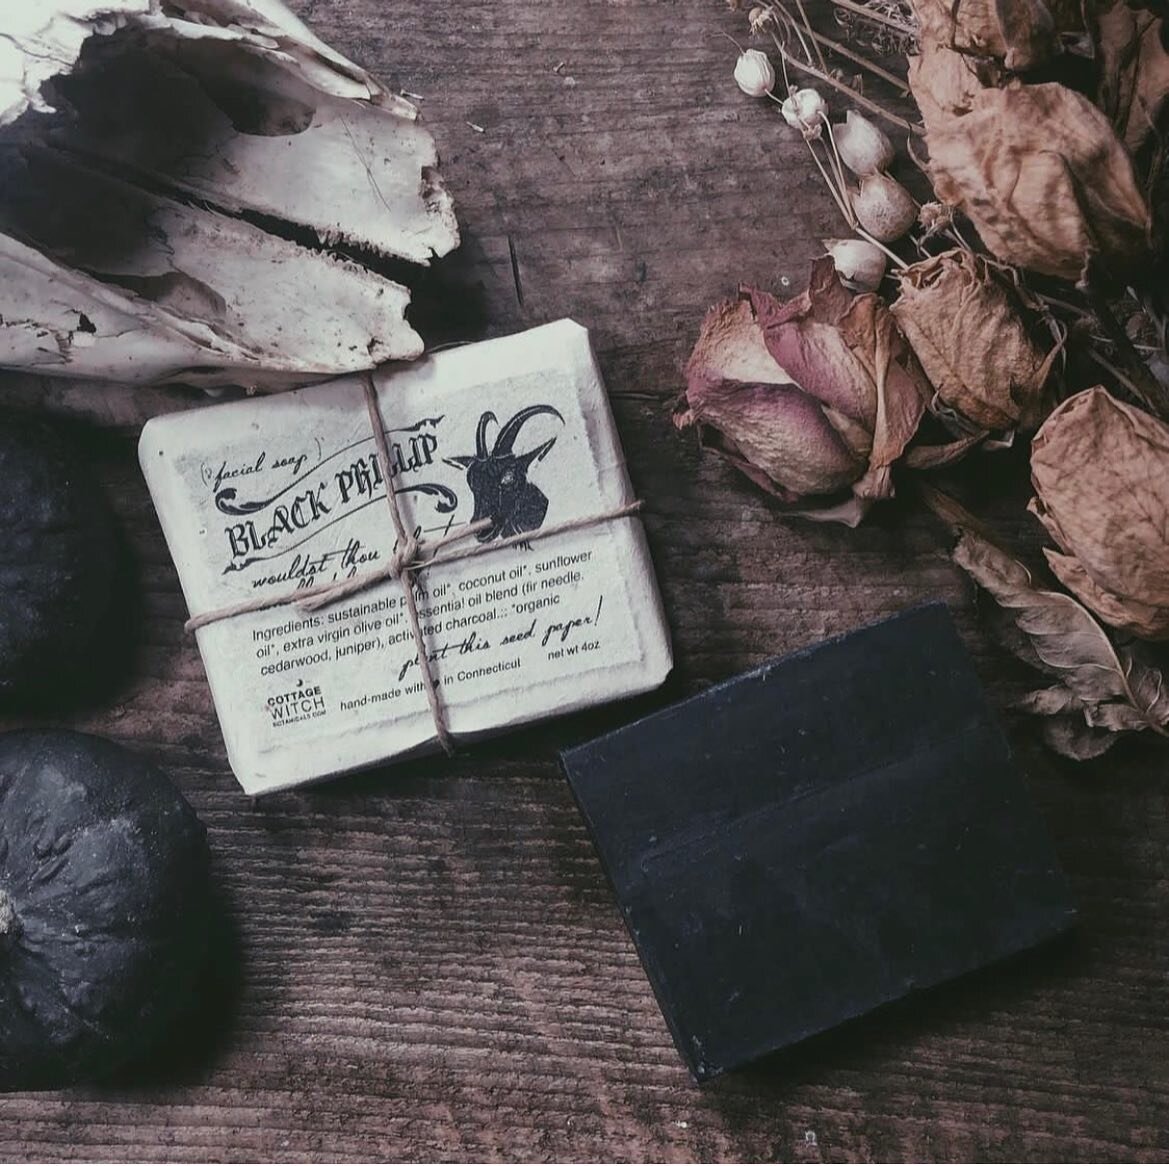 Wouldst thou like to smell deliciously?🖤

Scented with Fir Needle Essential Oil, Cedarwood Essential Oil and Juniper Essential Oil 🖤

#faerie #cauldron #witch #witchthings #witchshop #blackphillip #faeriesofinstagram #witchesofinsta #facesoap #herb